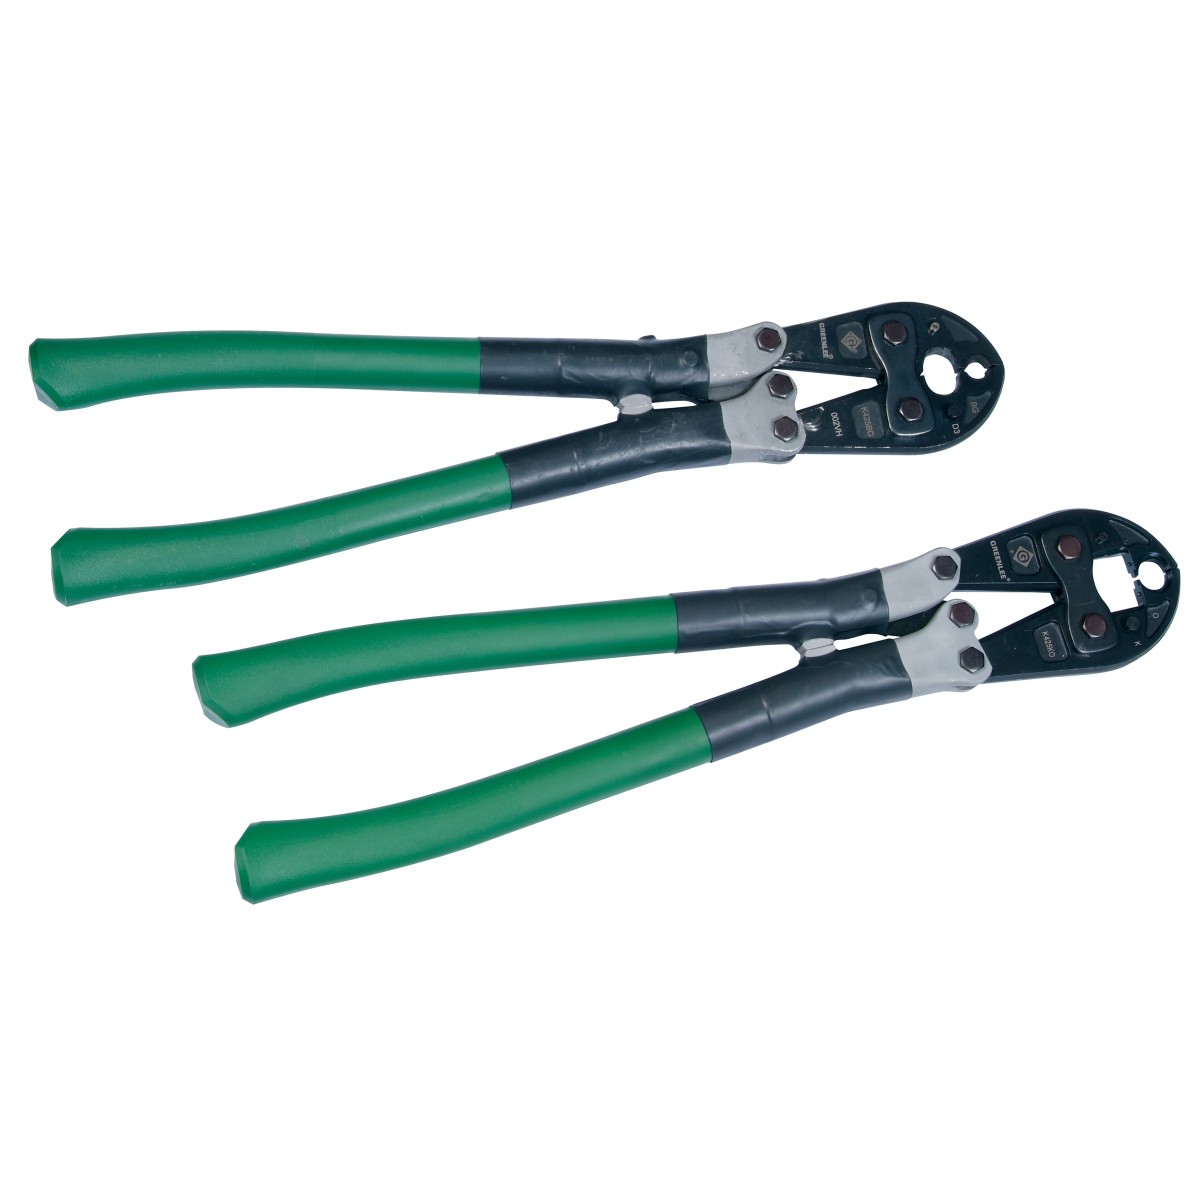 Manual Crimping Tool with D and O Die Grooves.  Designed for crimping a wide range of overhead service entrance connections, overhead splices, and overhead taps.  Easy-to-use MD-6 type 